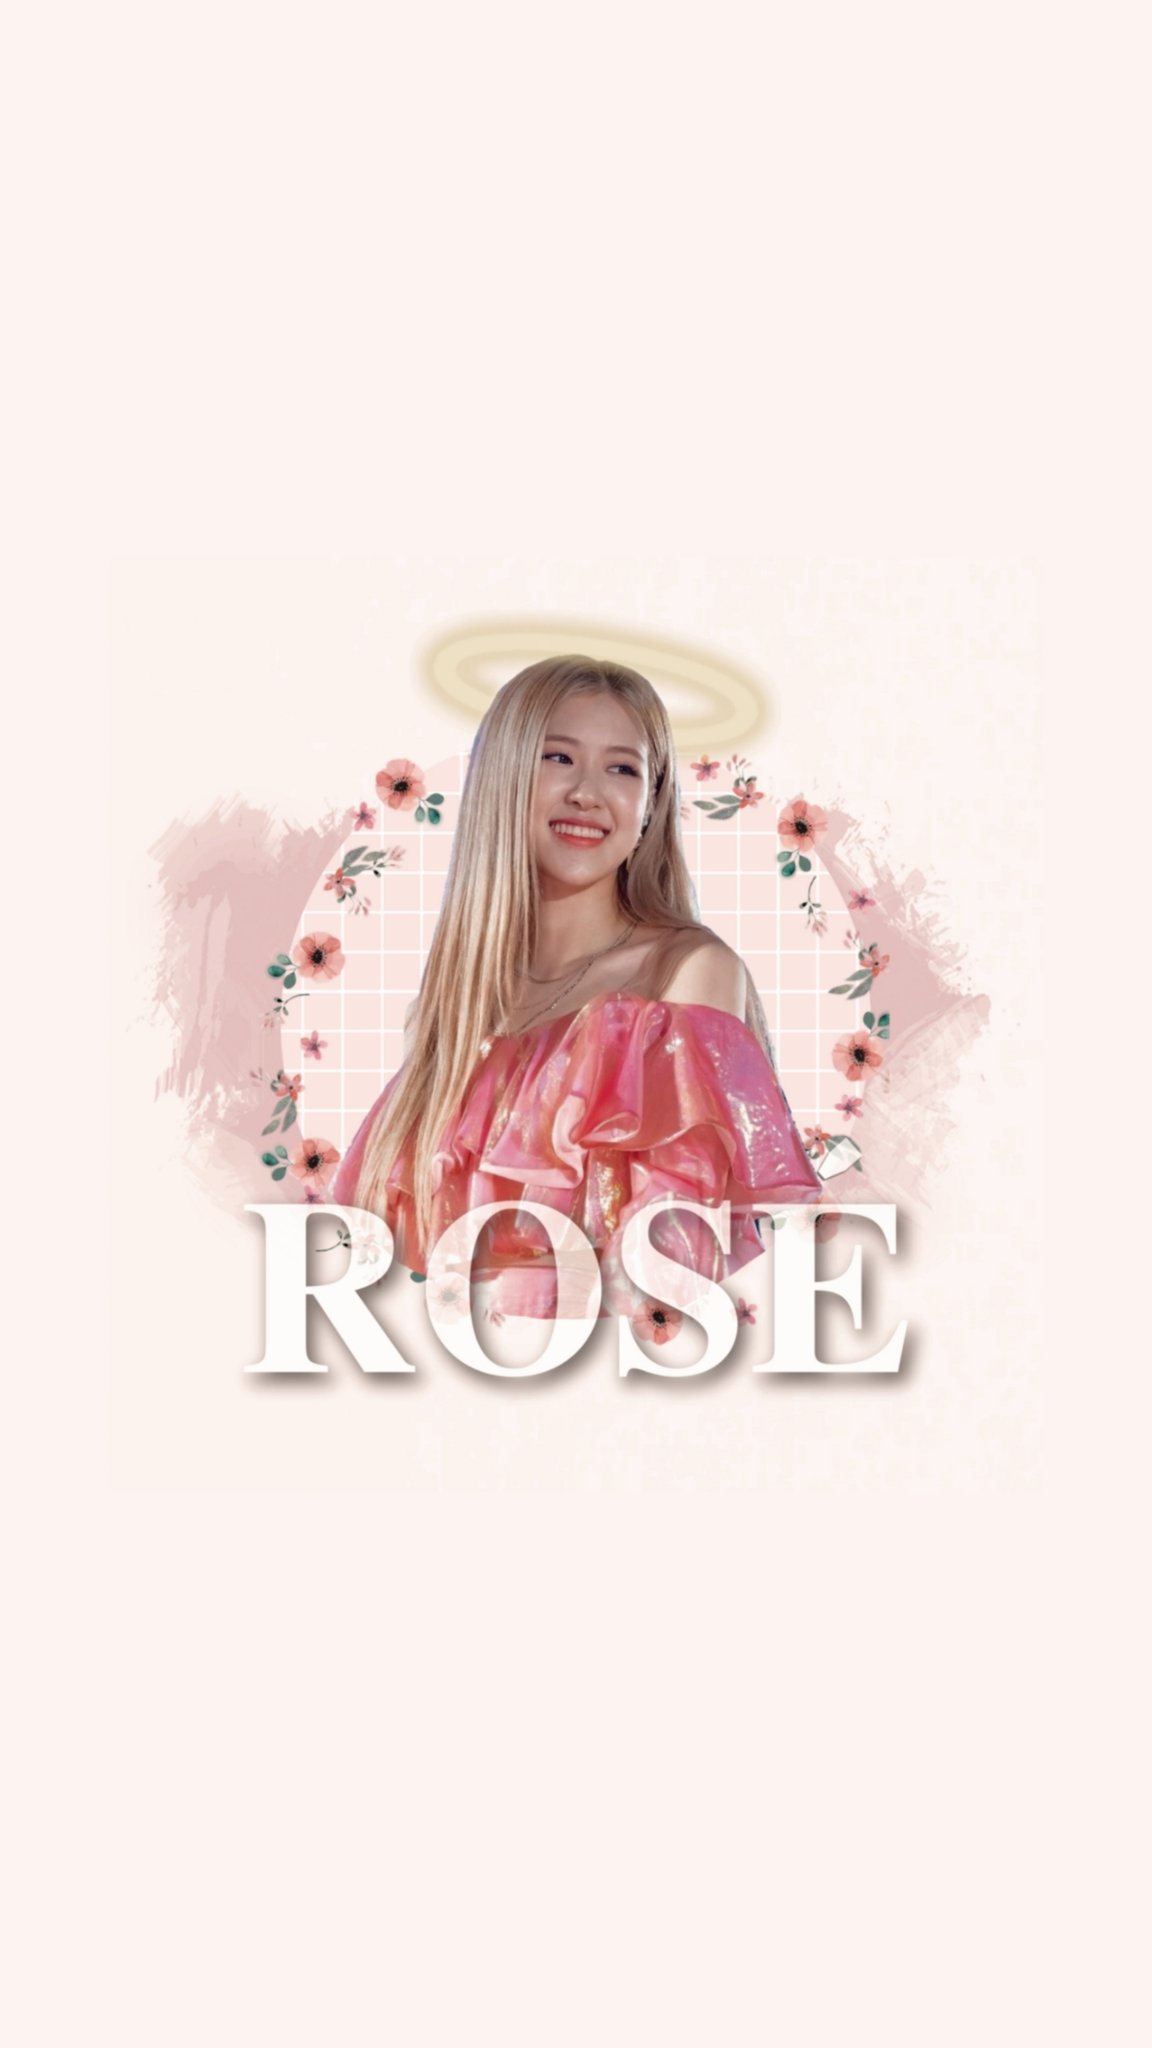 AZA¹²⁷ made these some time ago, just a Rosé header and wallpaper just with different filters and a pfp